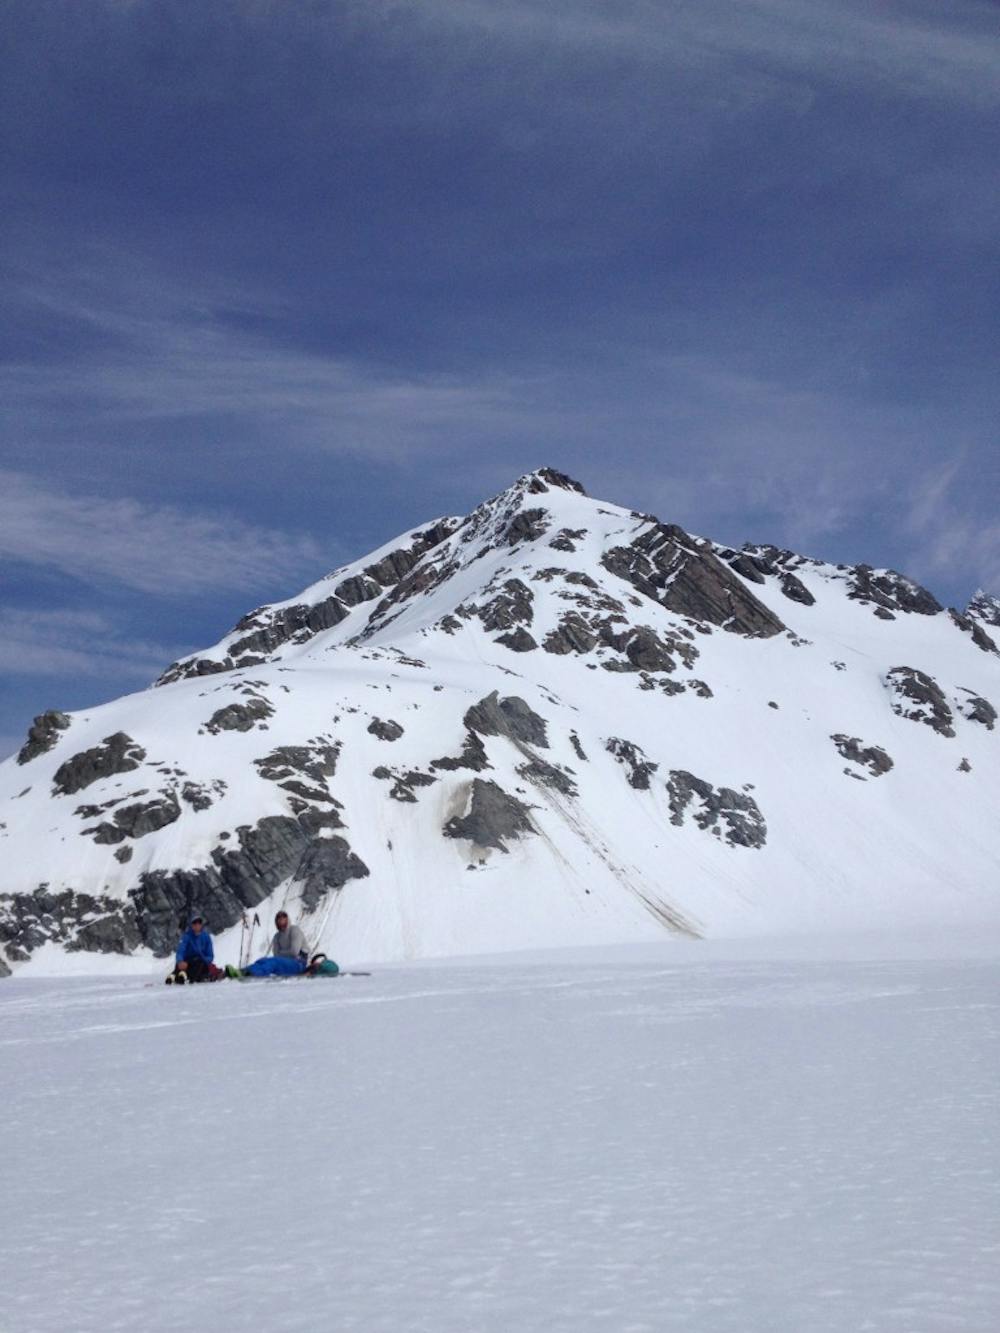 Looking at the main face of Mount Cooper on the left